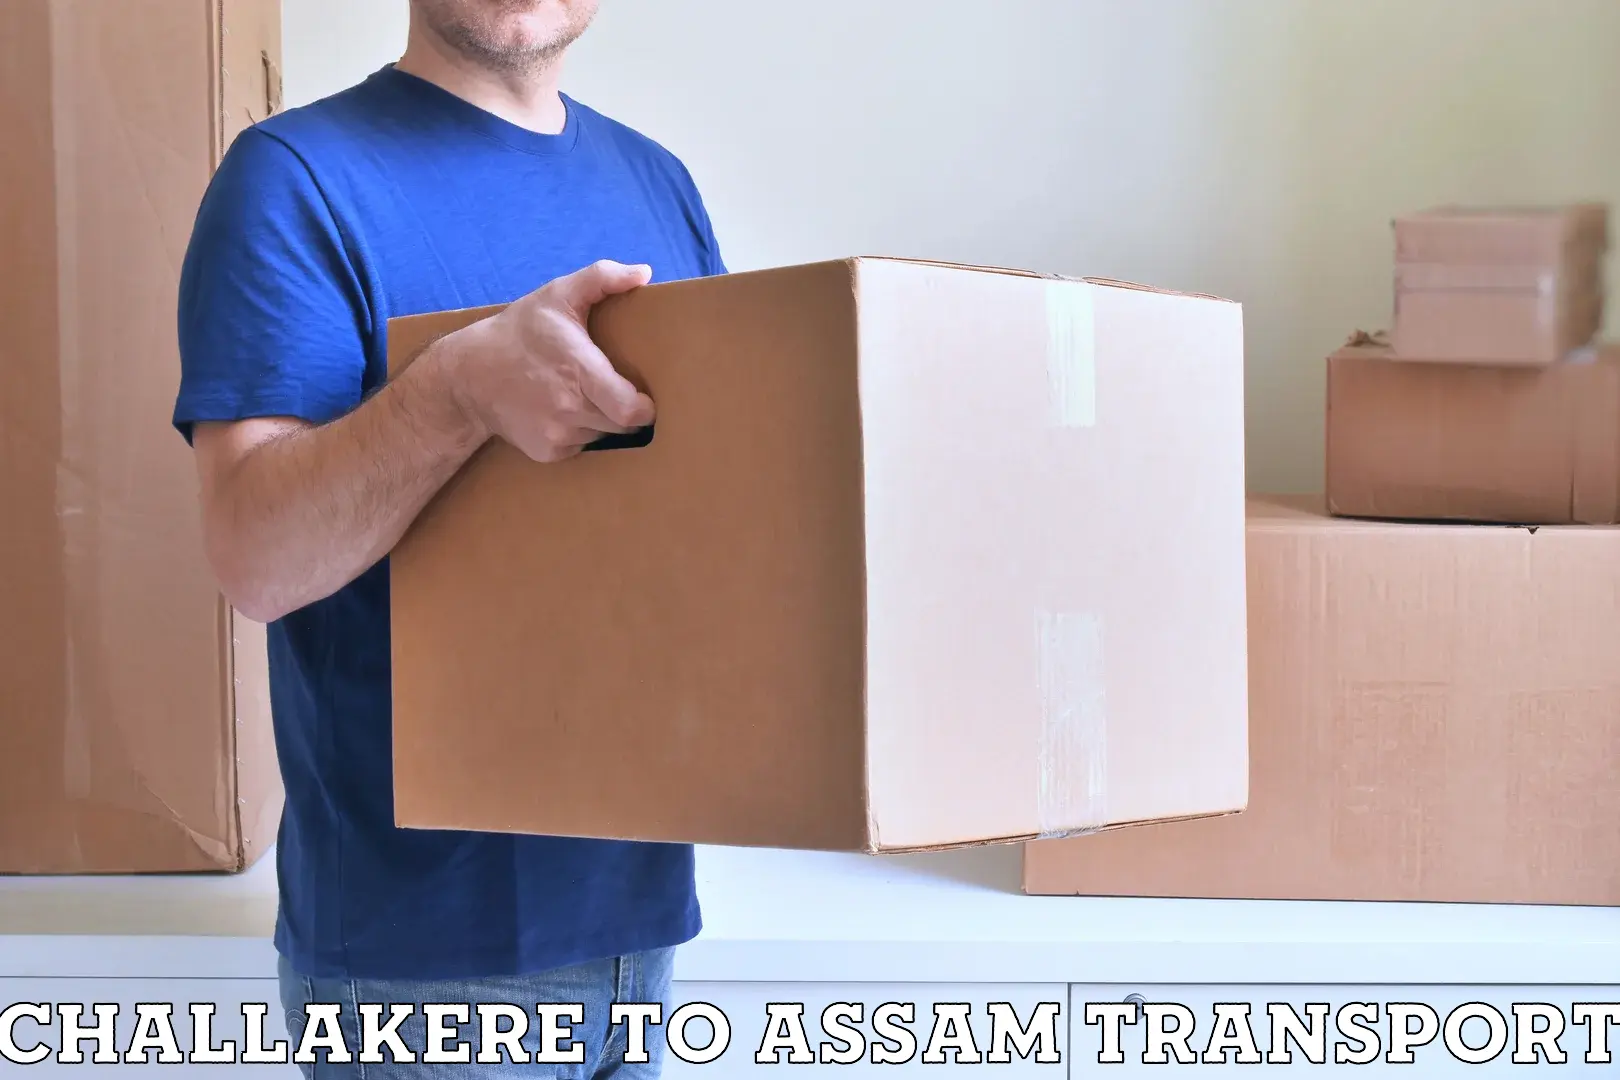 Container transport service Challakere to Assam